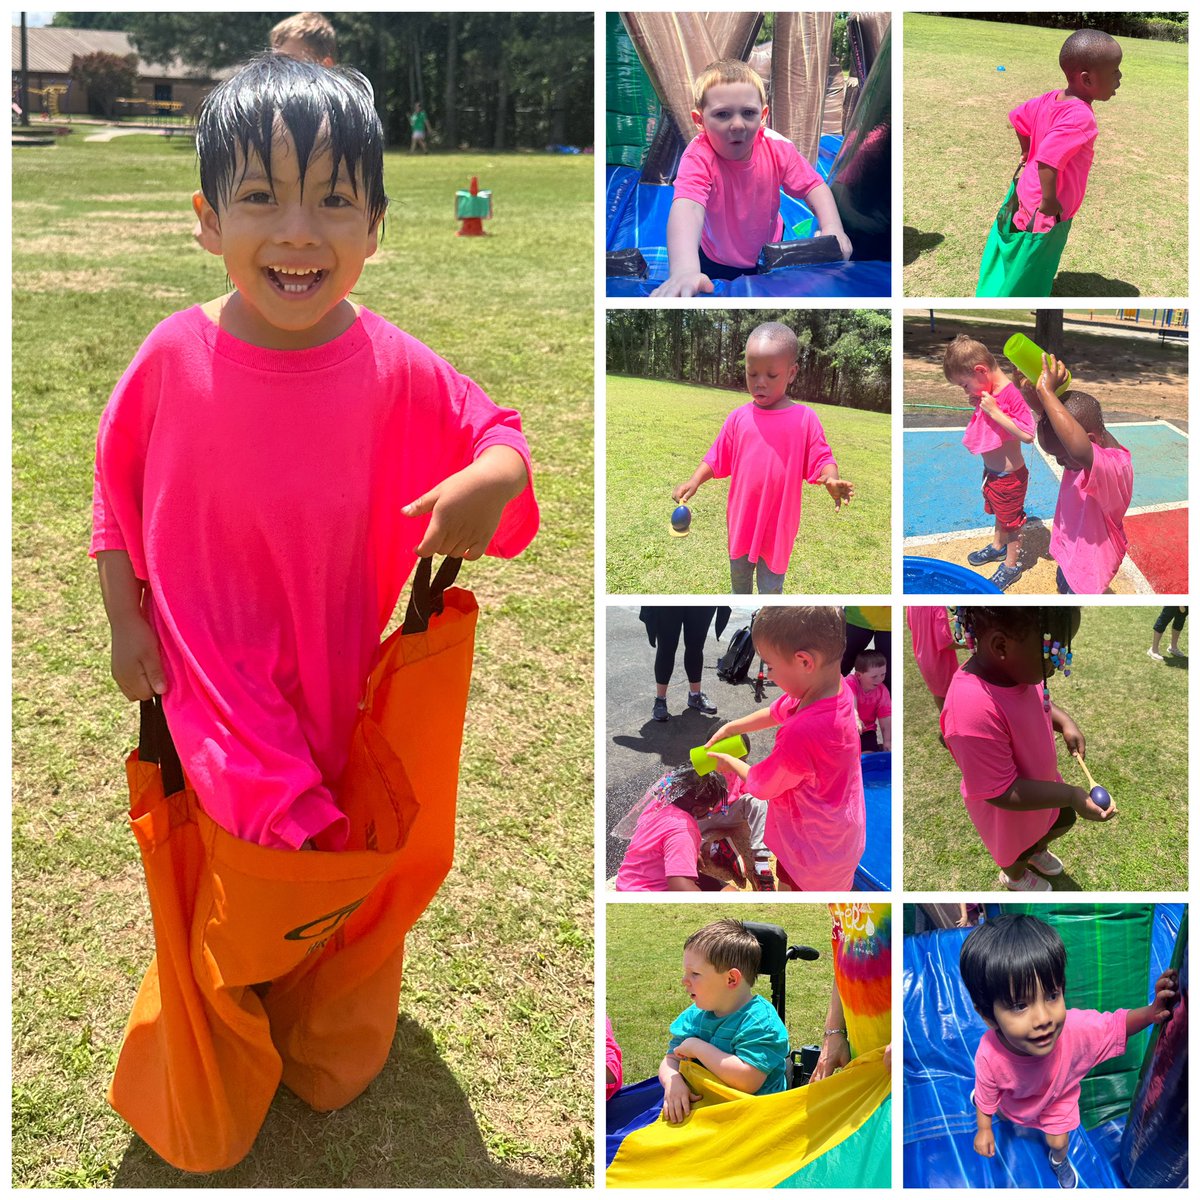 When your first Field Day is the best day ever @npepanthers @NPESprincipal @FCS_SEC